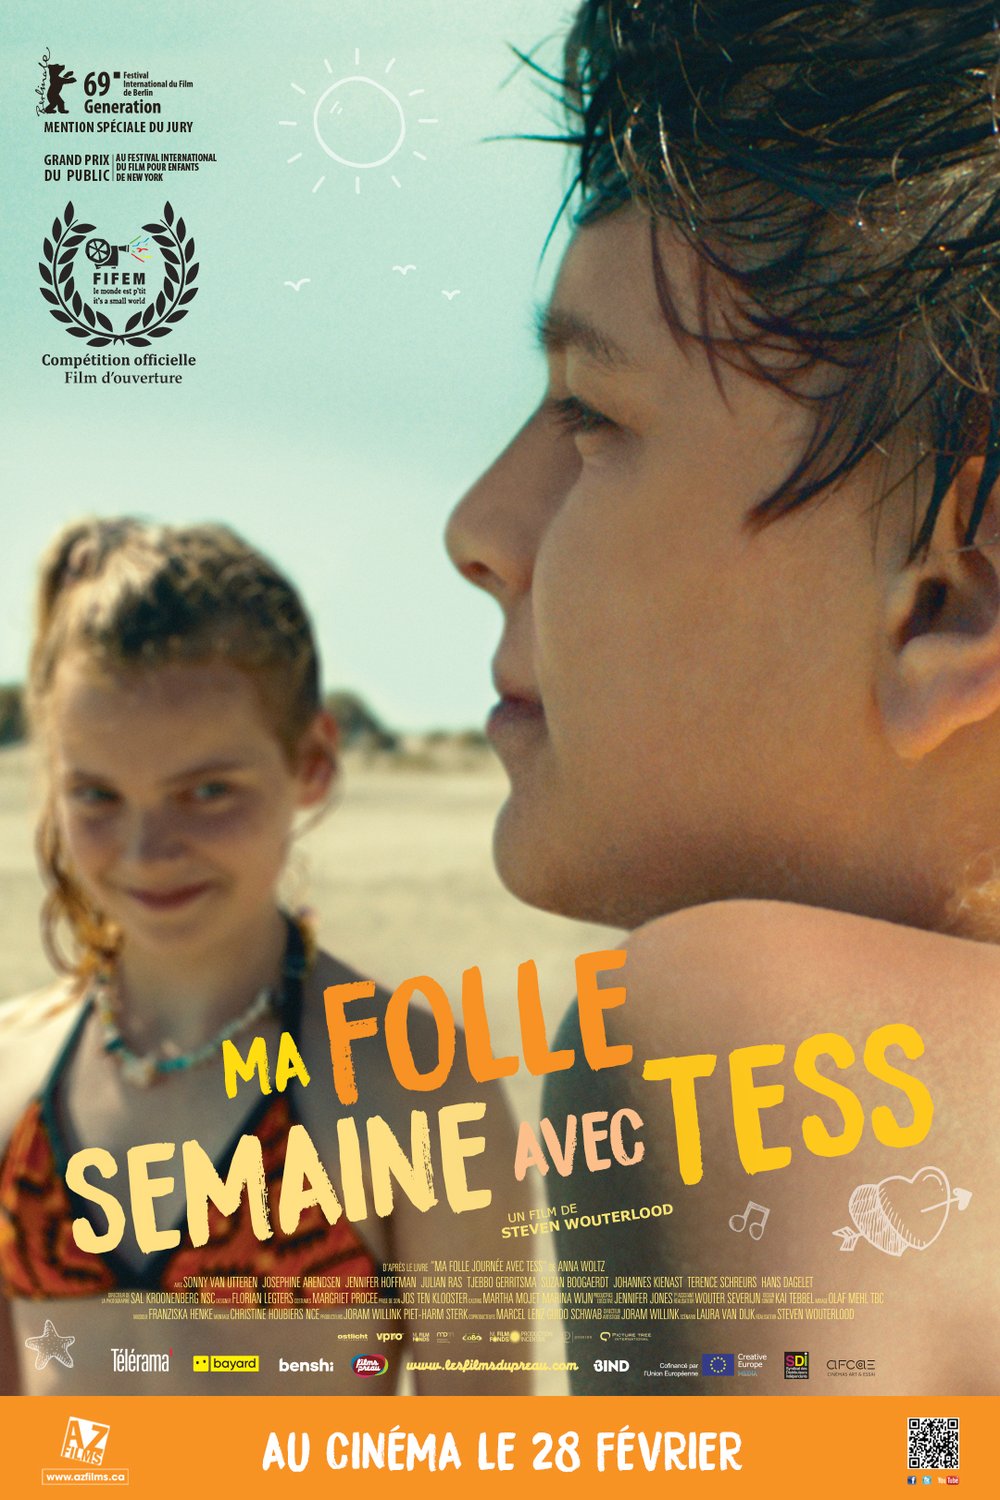 Poster of the movie Ma folle semaine avec Tess